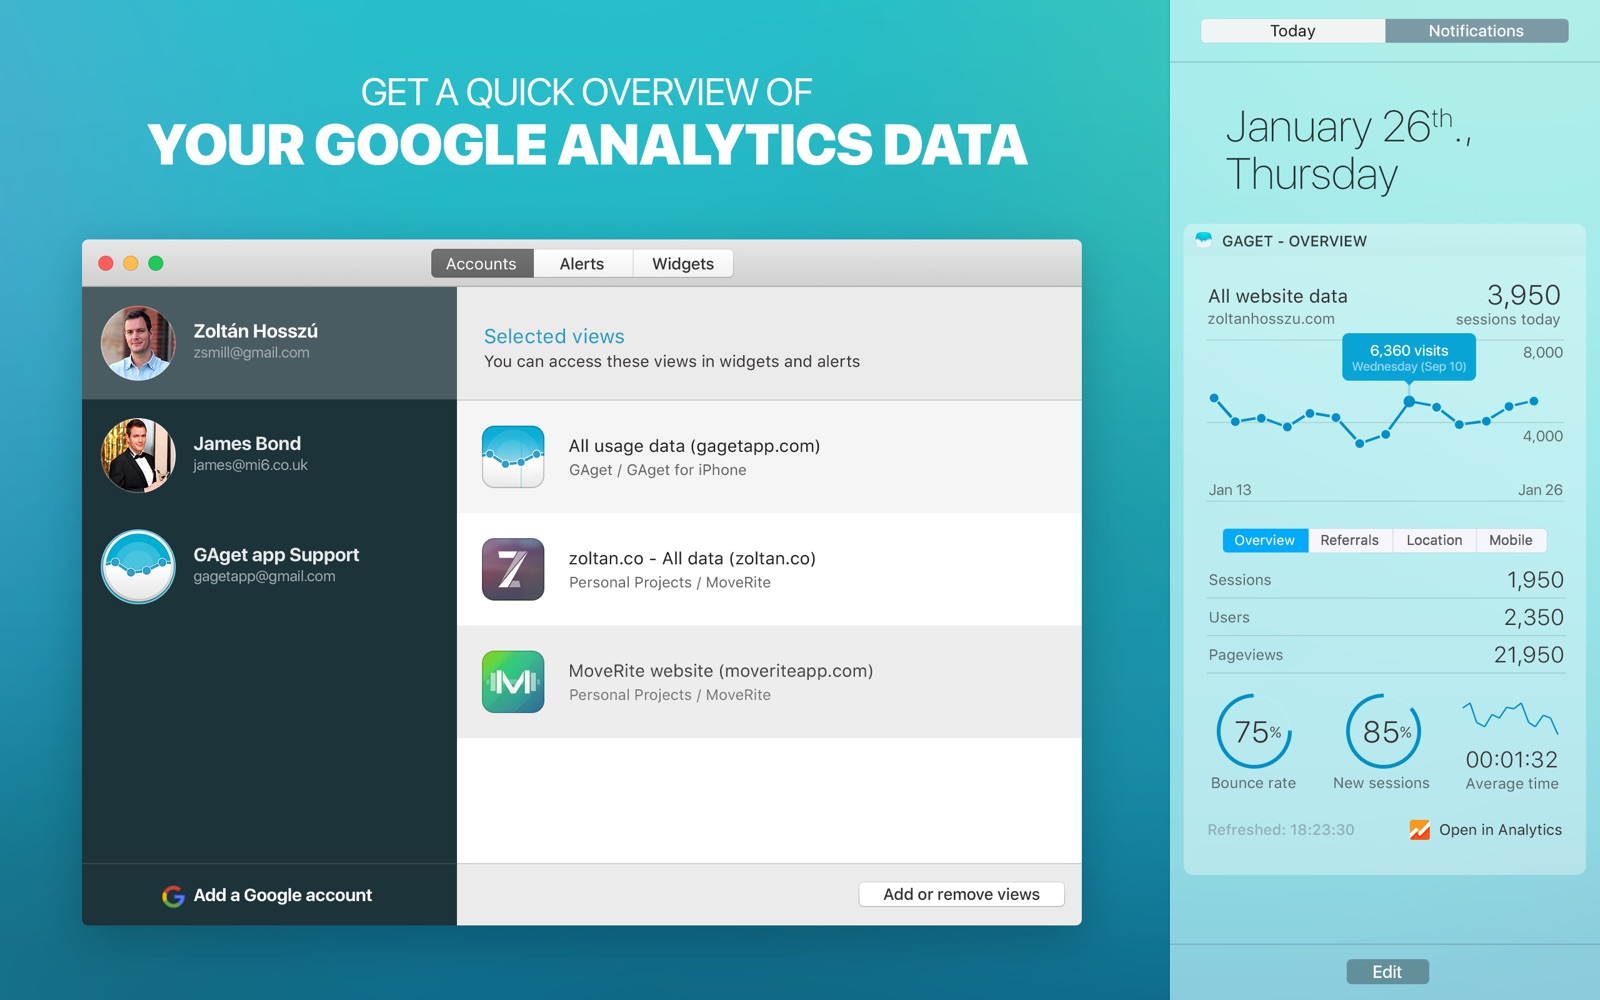 Get a quick overview of your Google Analytics data with GAget